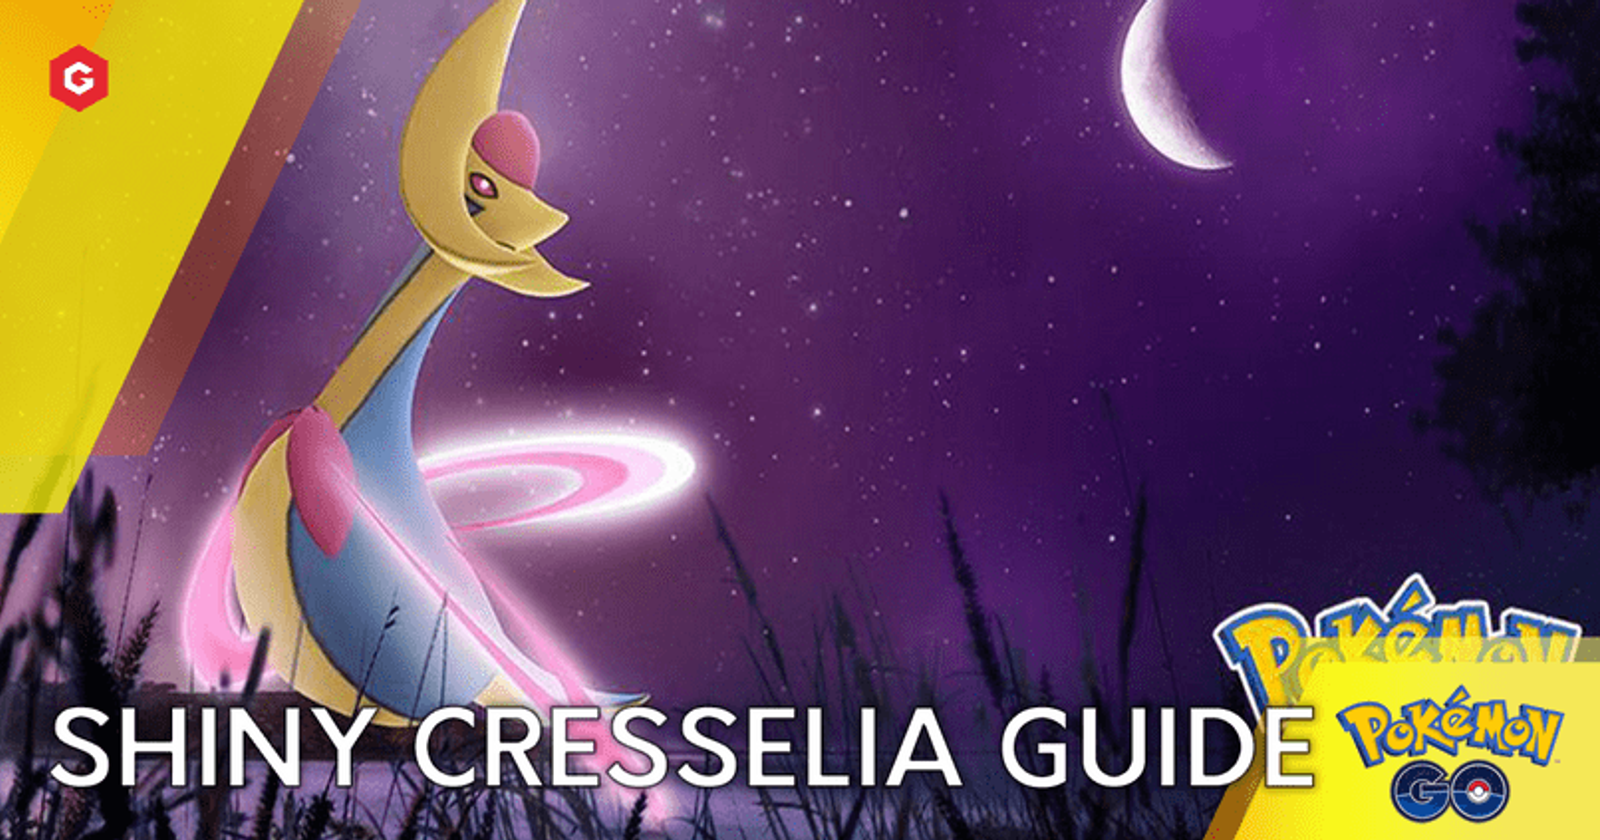 How to catch a Shiny Pokémon (updated for X and Y) - Esports News UK